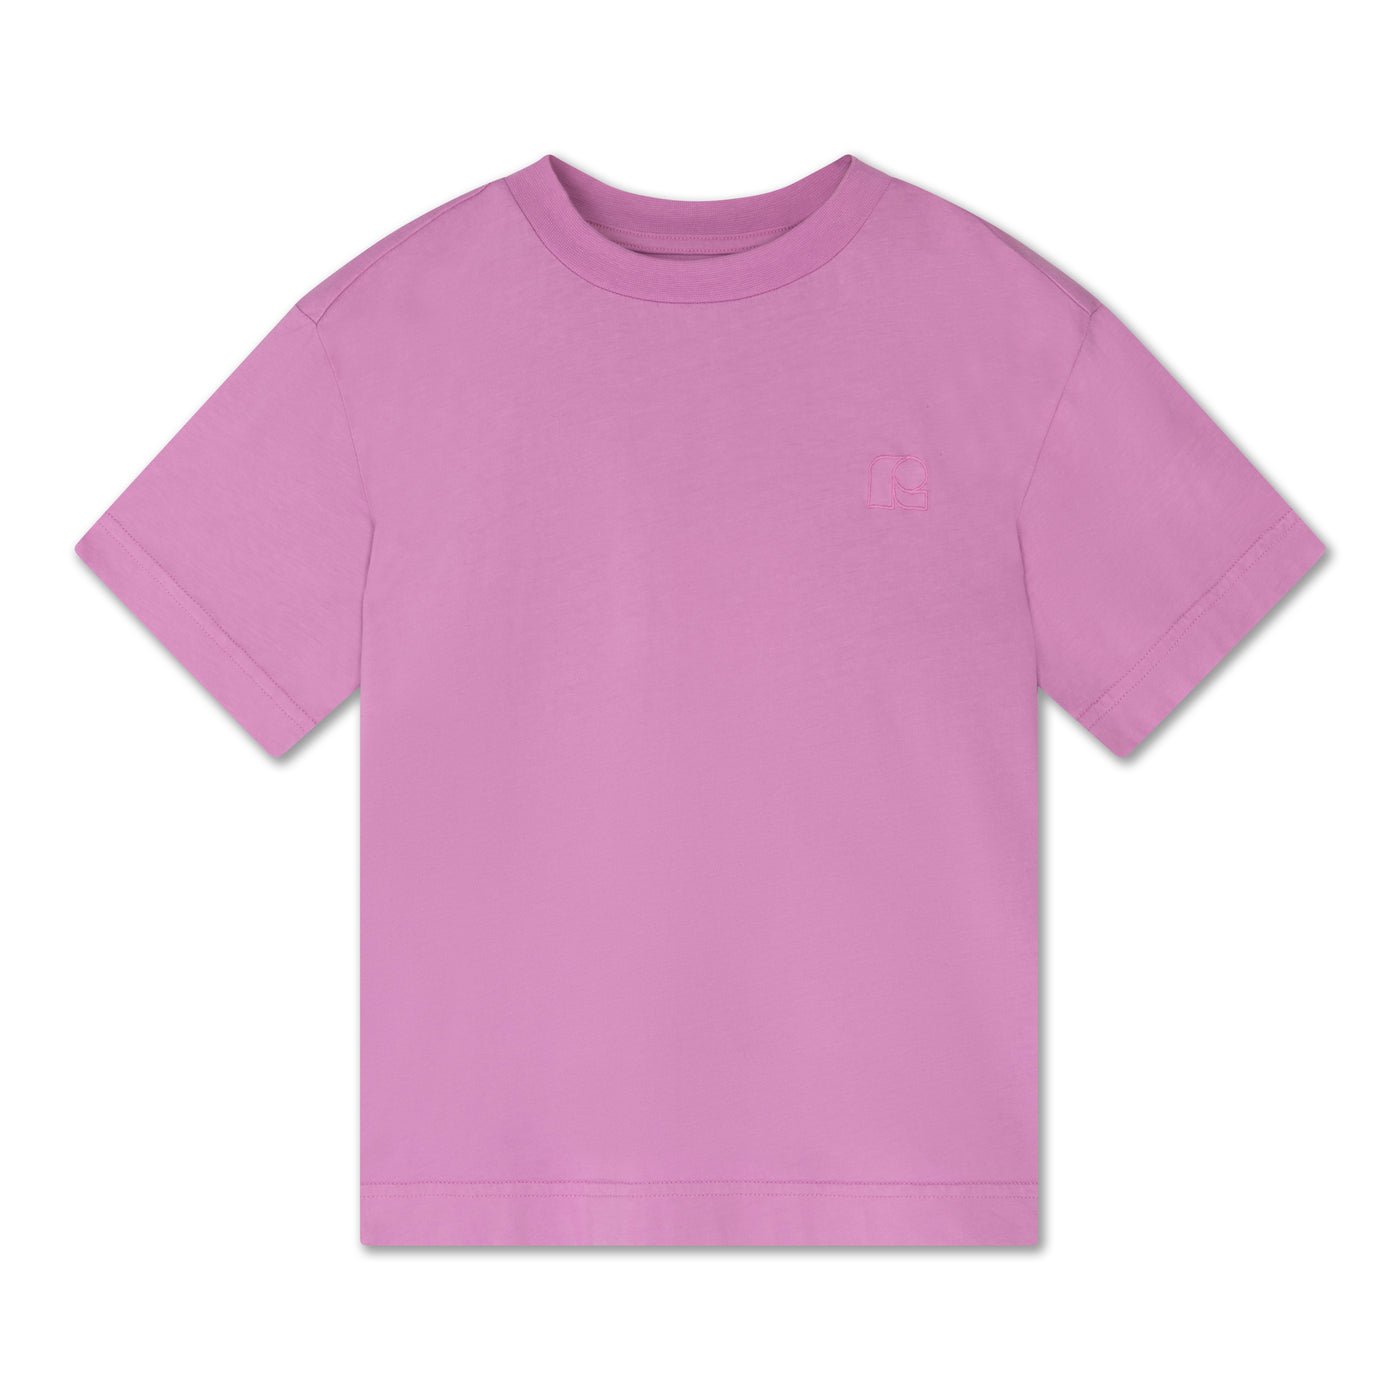 tee shirt - faded violet